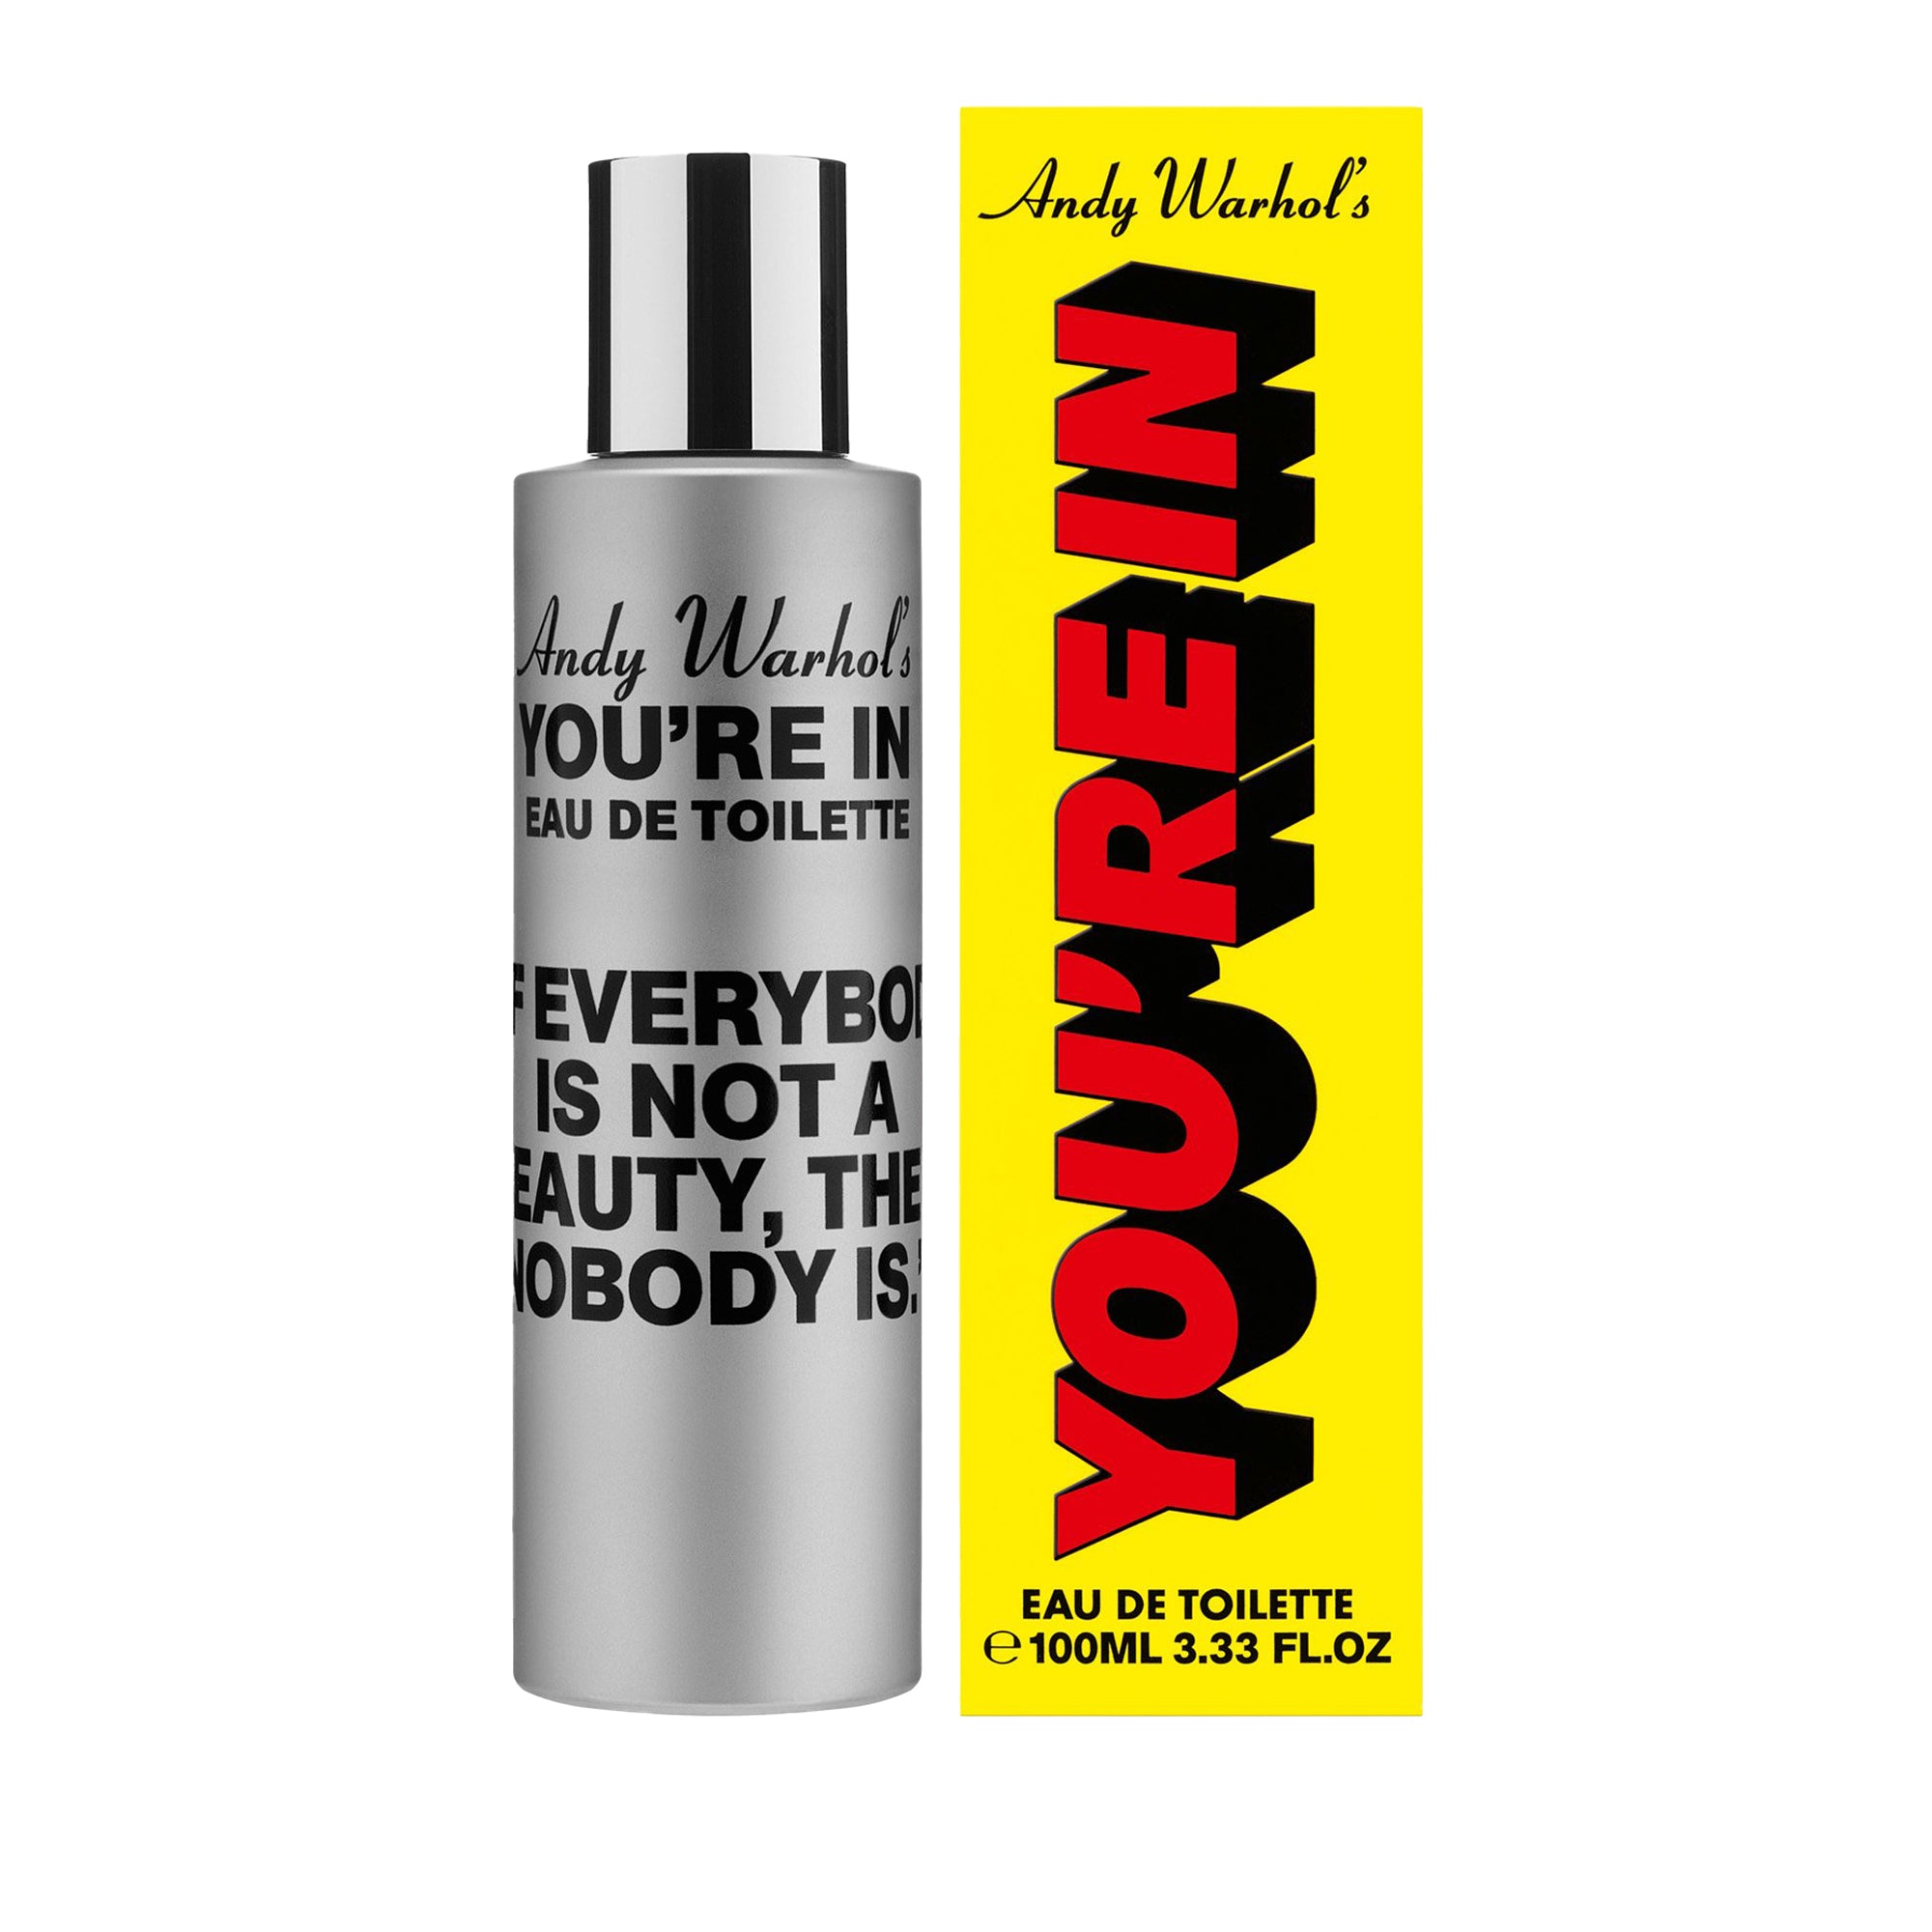 CDG PARFUM - "Andy Warhol's You're In" 100ml - (BEAUTY) view 2